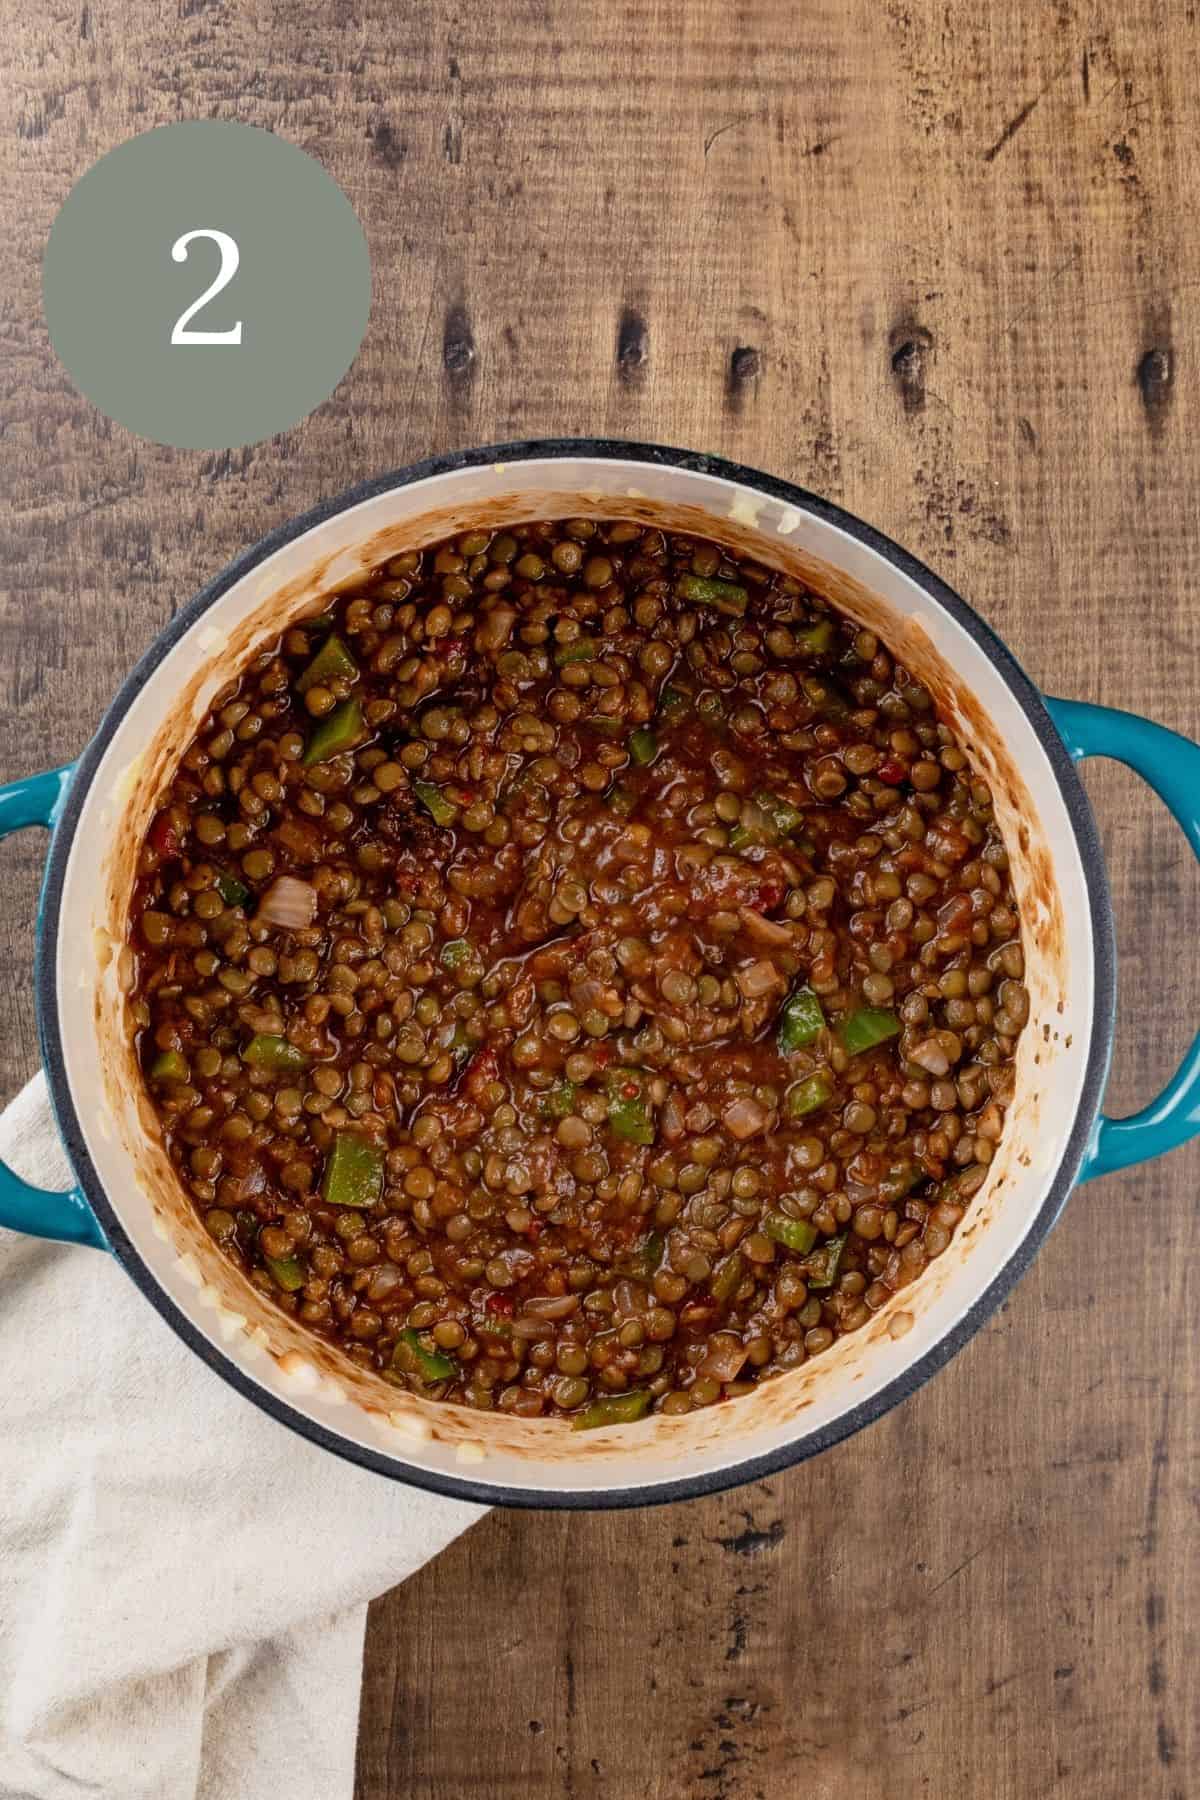 the lentils after adding all the ingredients to the cooking pot. the pot is resting on a linen towel. a green circle with the number 2 is the in the top left corner.